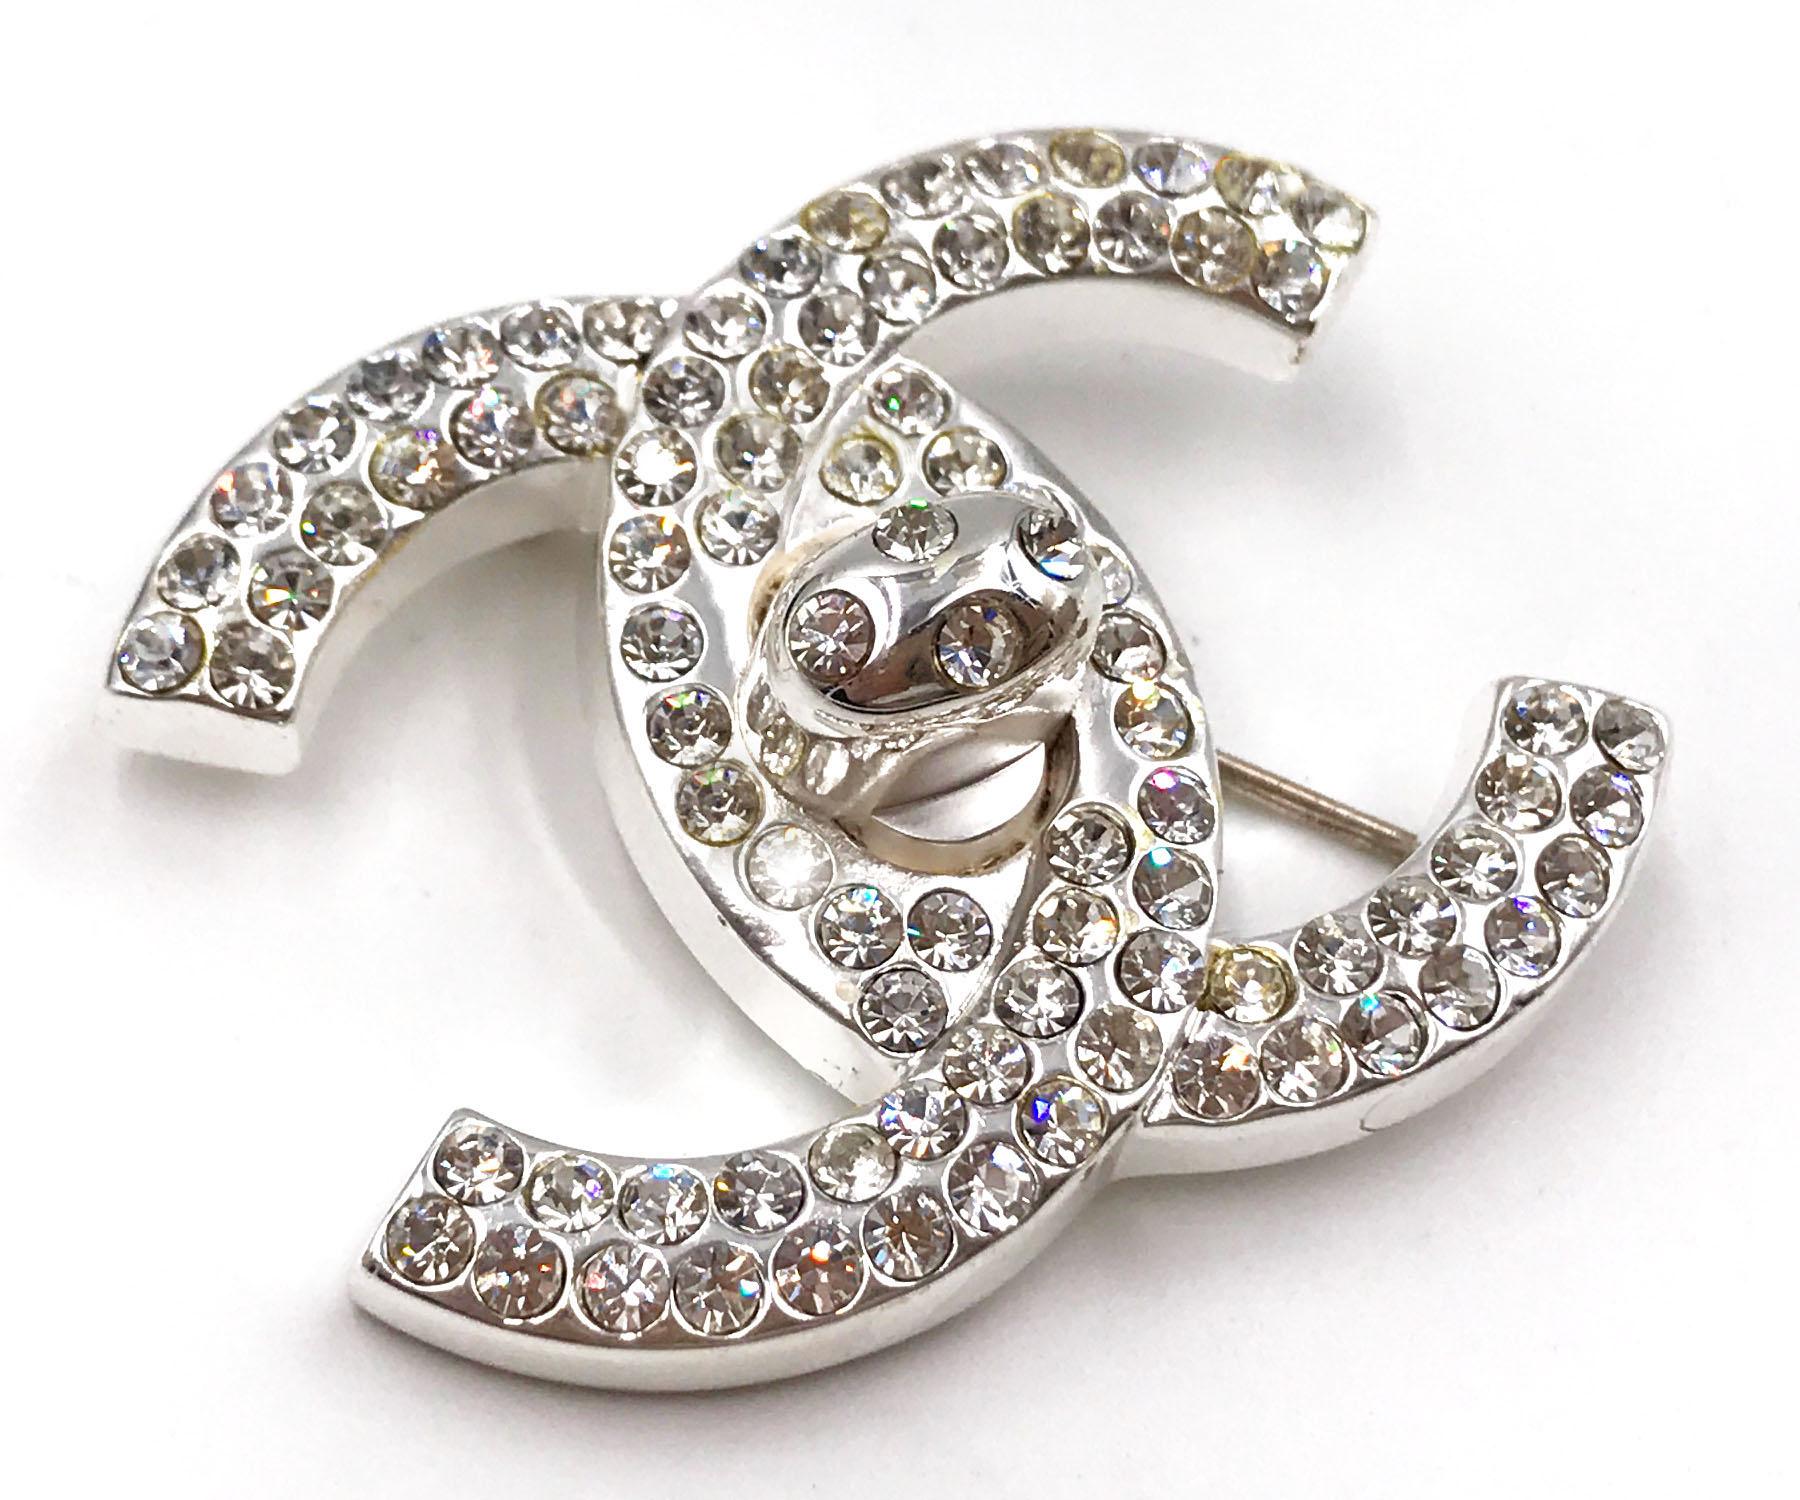 Artisan Chanel Rare Vintage Silver CC Crystal Turnlock Brooch For Sale